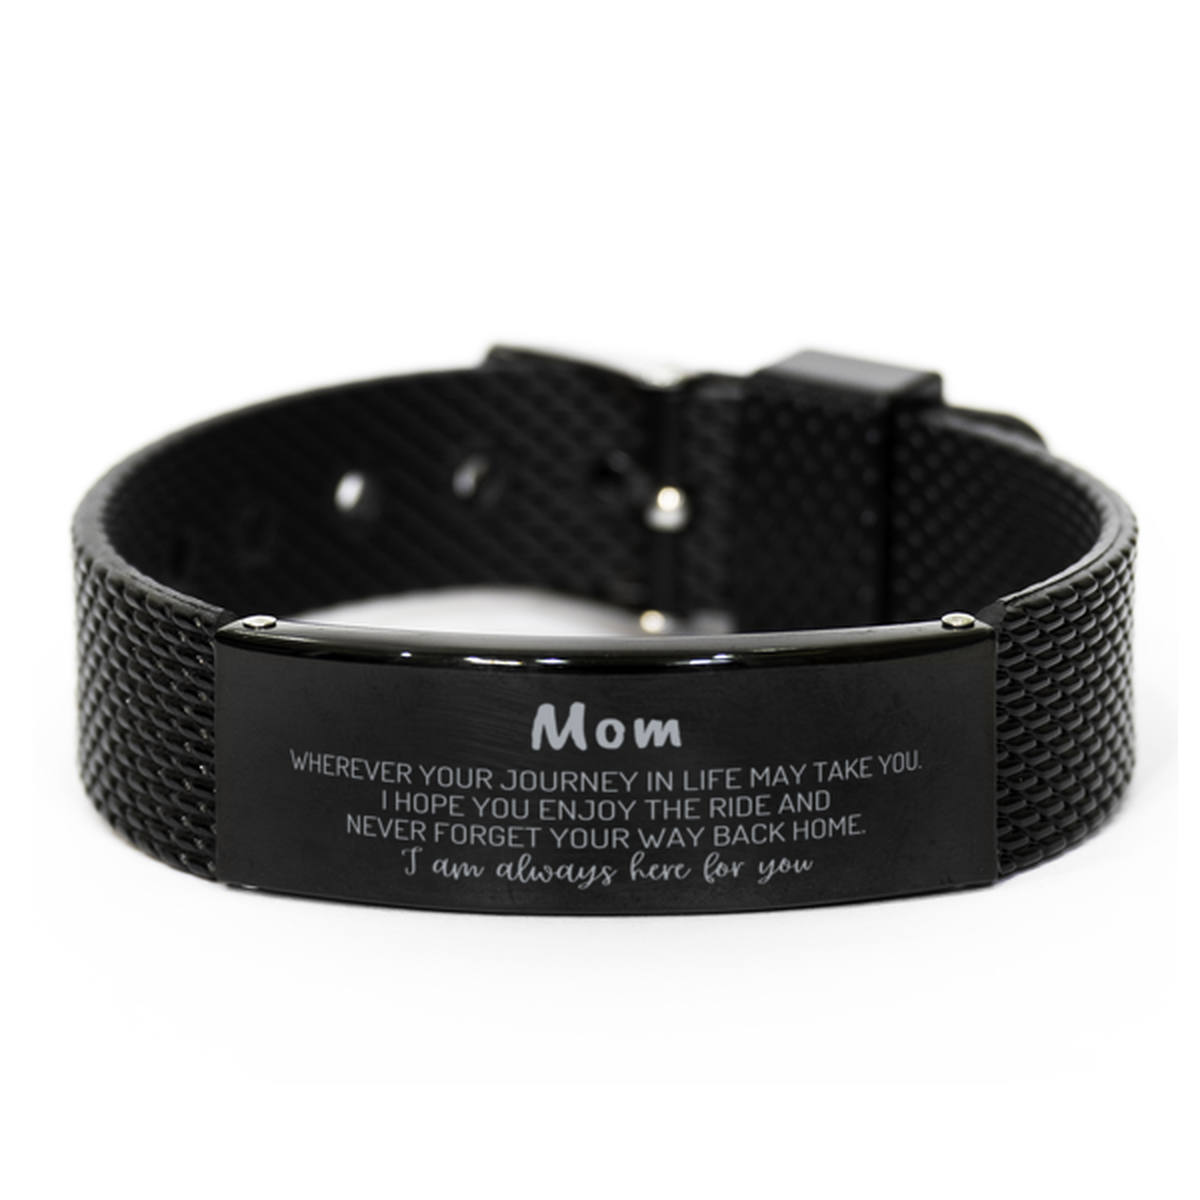 Mom wherever your journey in life may take you, I am always here for you Mom Black Shark Mesh Bracelet, Awesome Christmas Gifts For Mom, Mom Birthday Gifts for Men Women Family Loved One